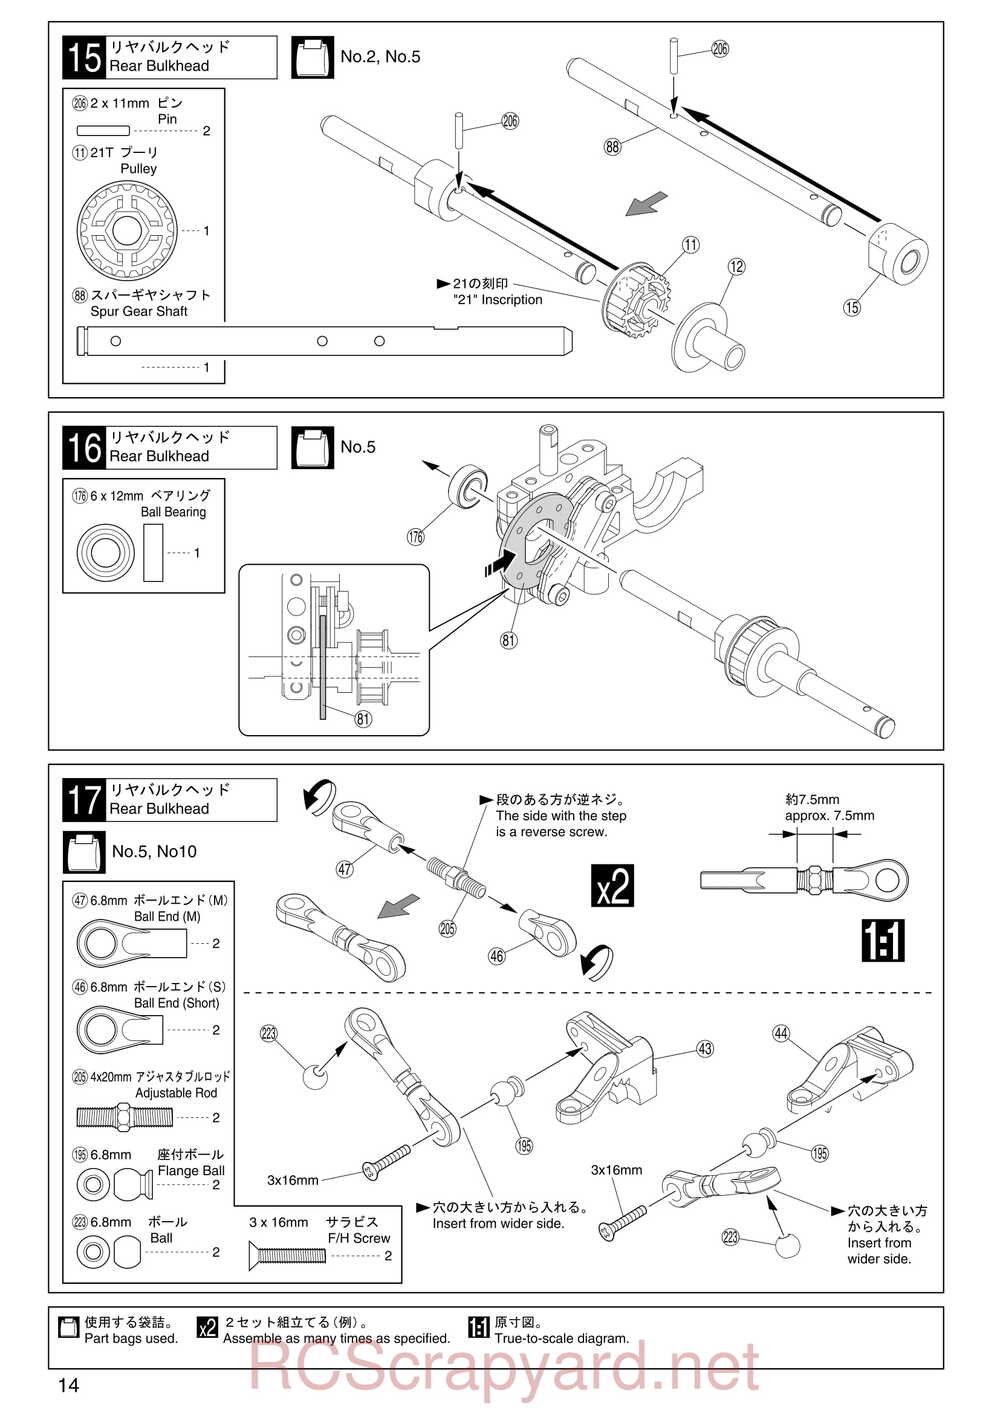 Kyosho - 31257 - V-One RRR Rubber - Manual - Page 14